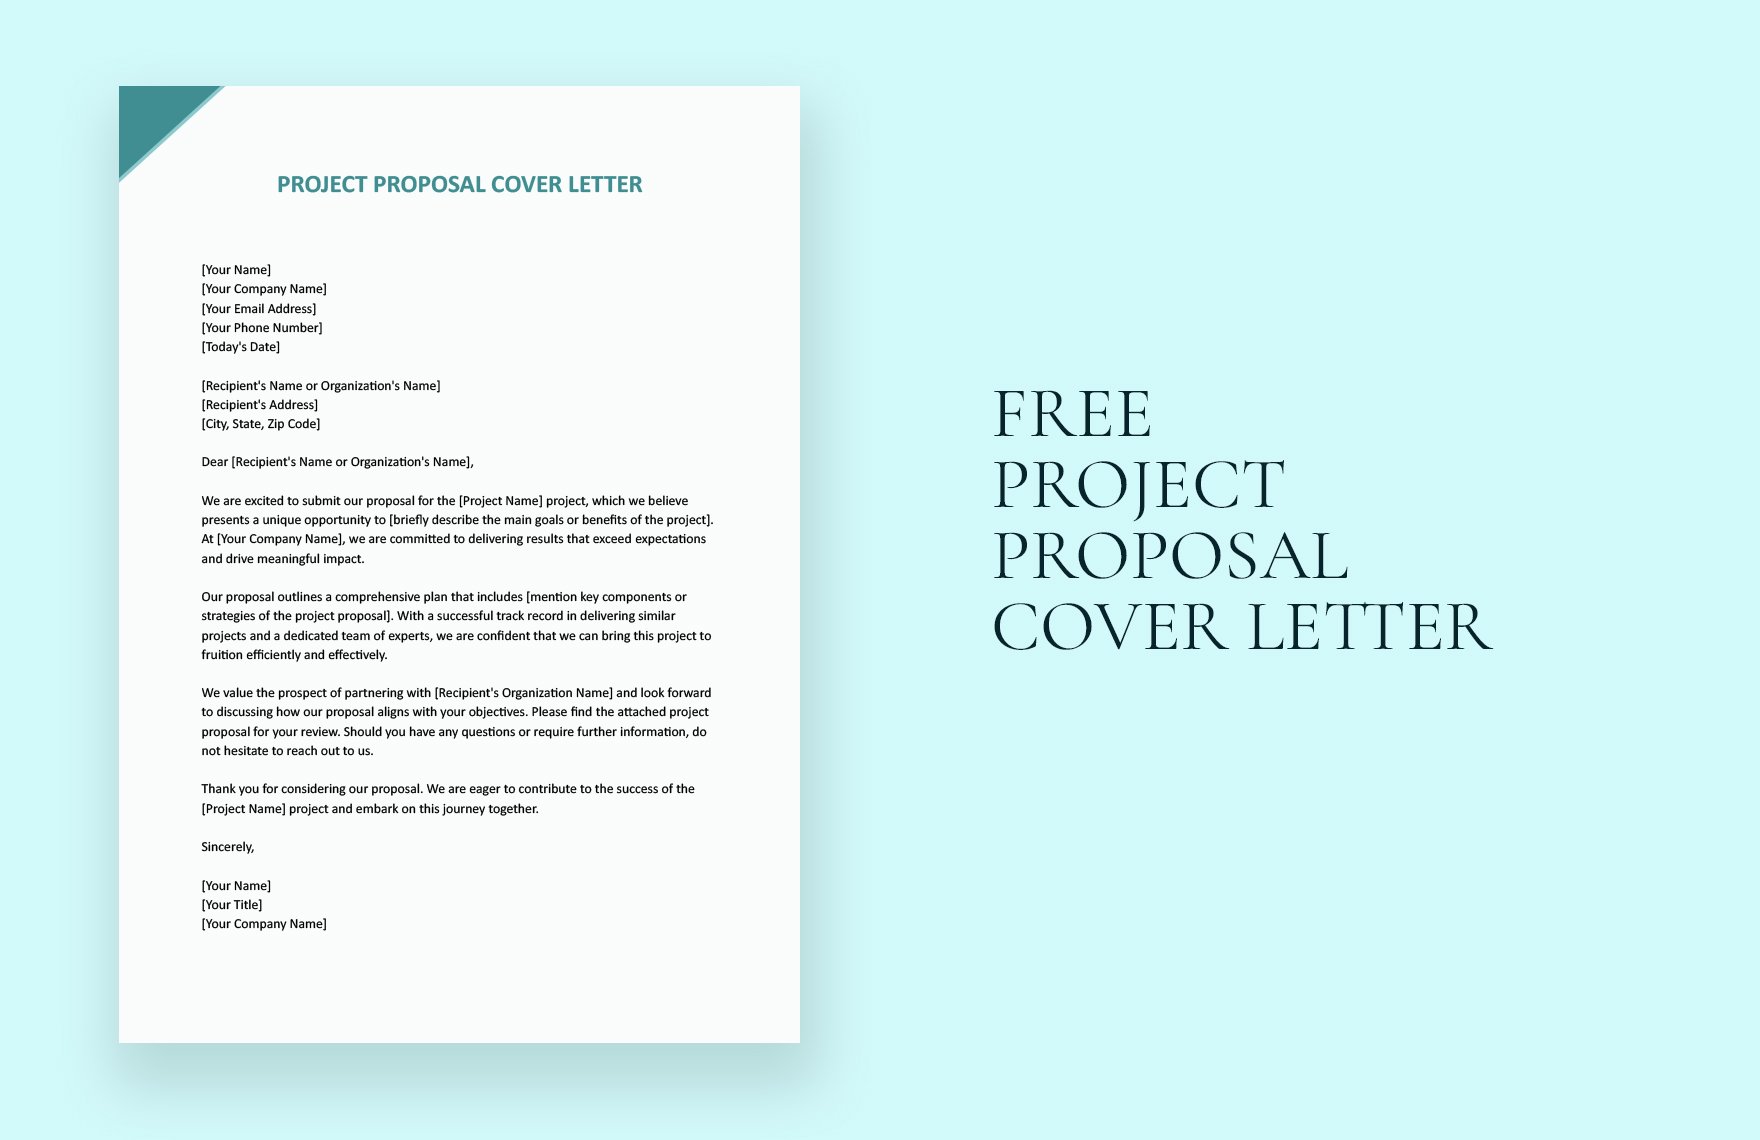 Project Proposal Cover Letter in Word, Google Docs